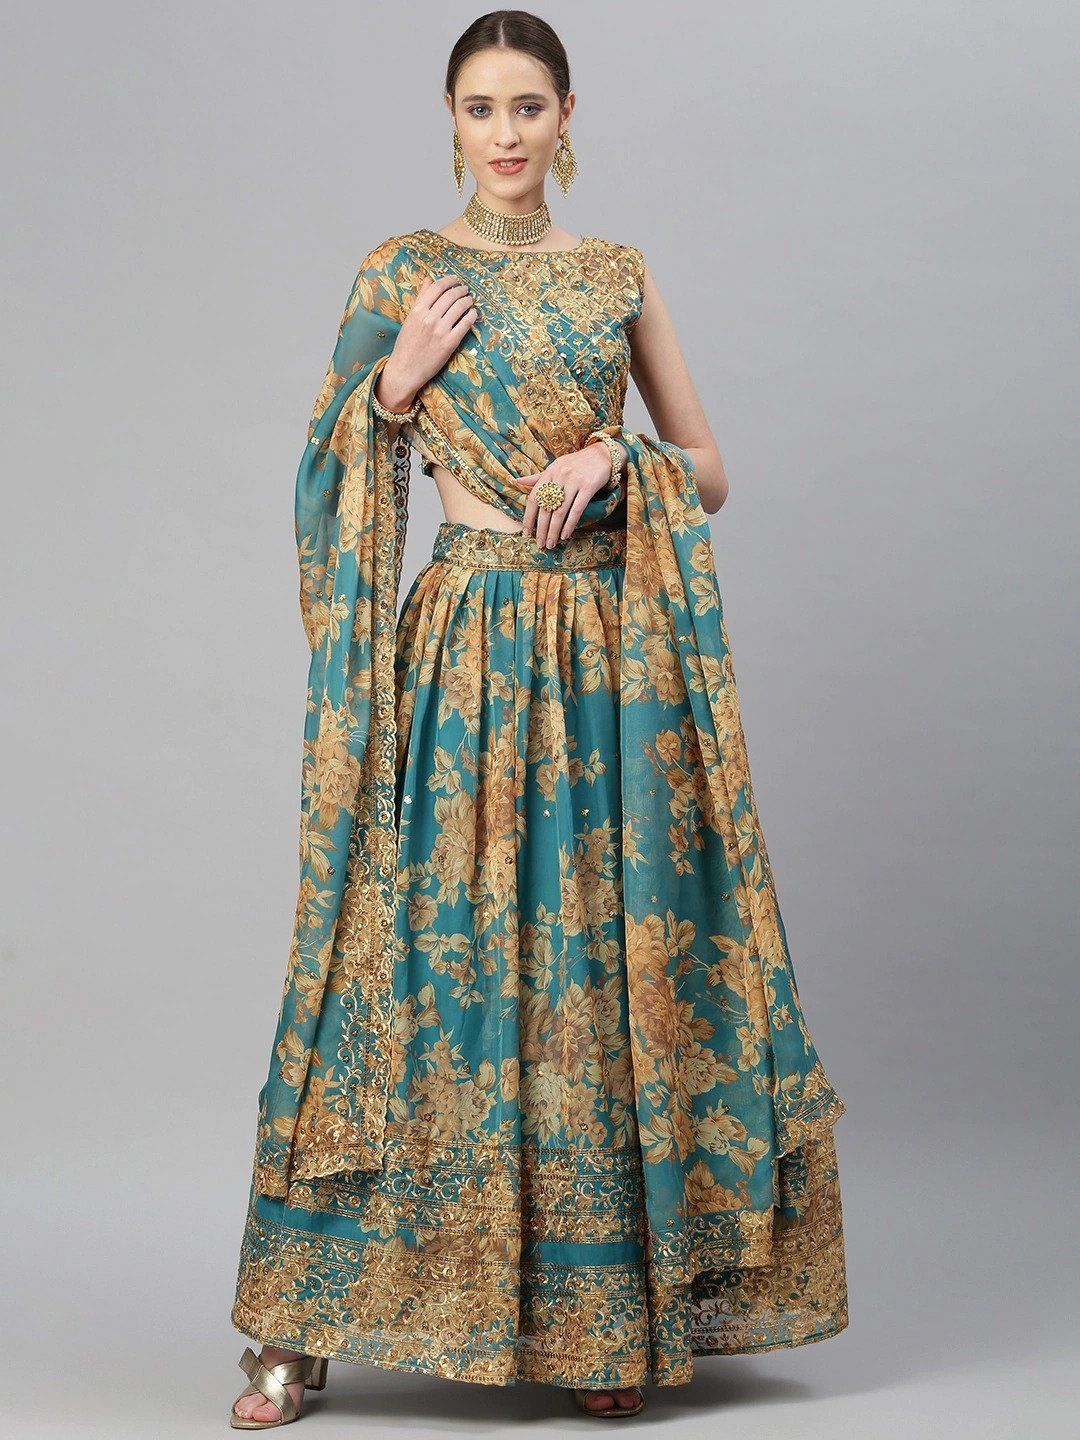 Teal & Peach-Coloured Embellished Sequinned Semi-Stitched Myntra Lehenga & Unstitched Blouse (Default)